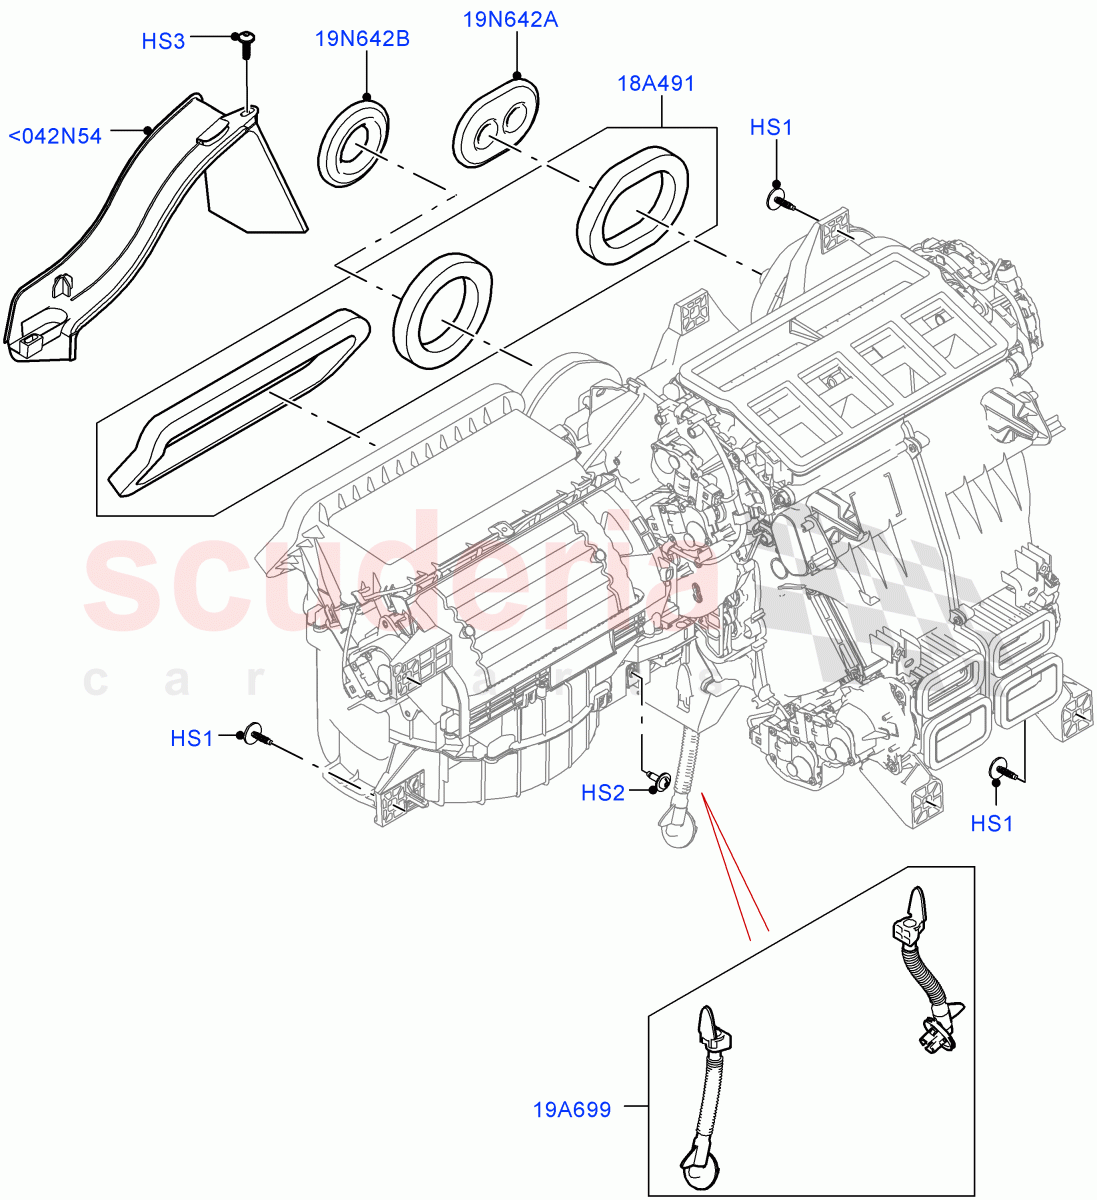 Heater/Air Cond.External Components(Main Unit, Nitra Plant Build) of Land Rover Land Rover Defender (2020+) [2.0 Turbo Petrol AJ200P]